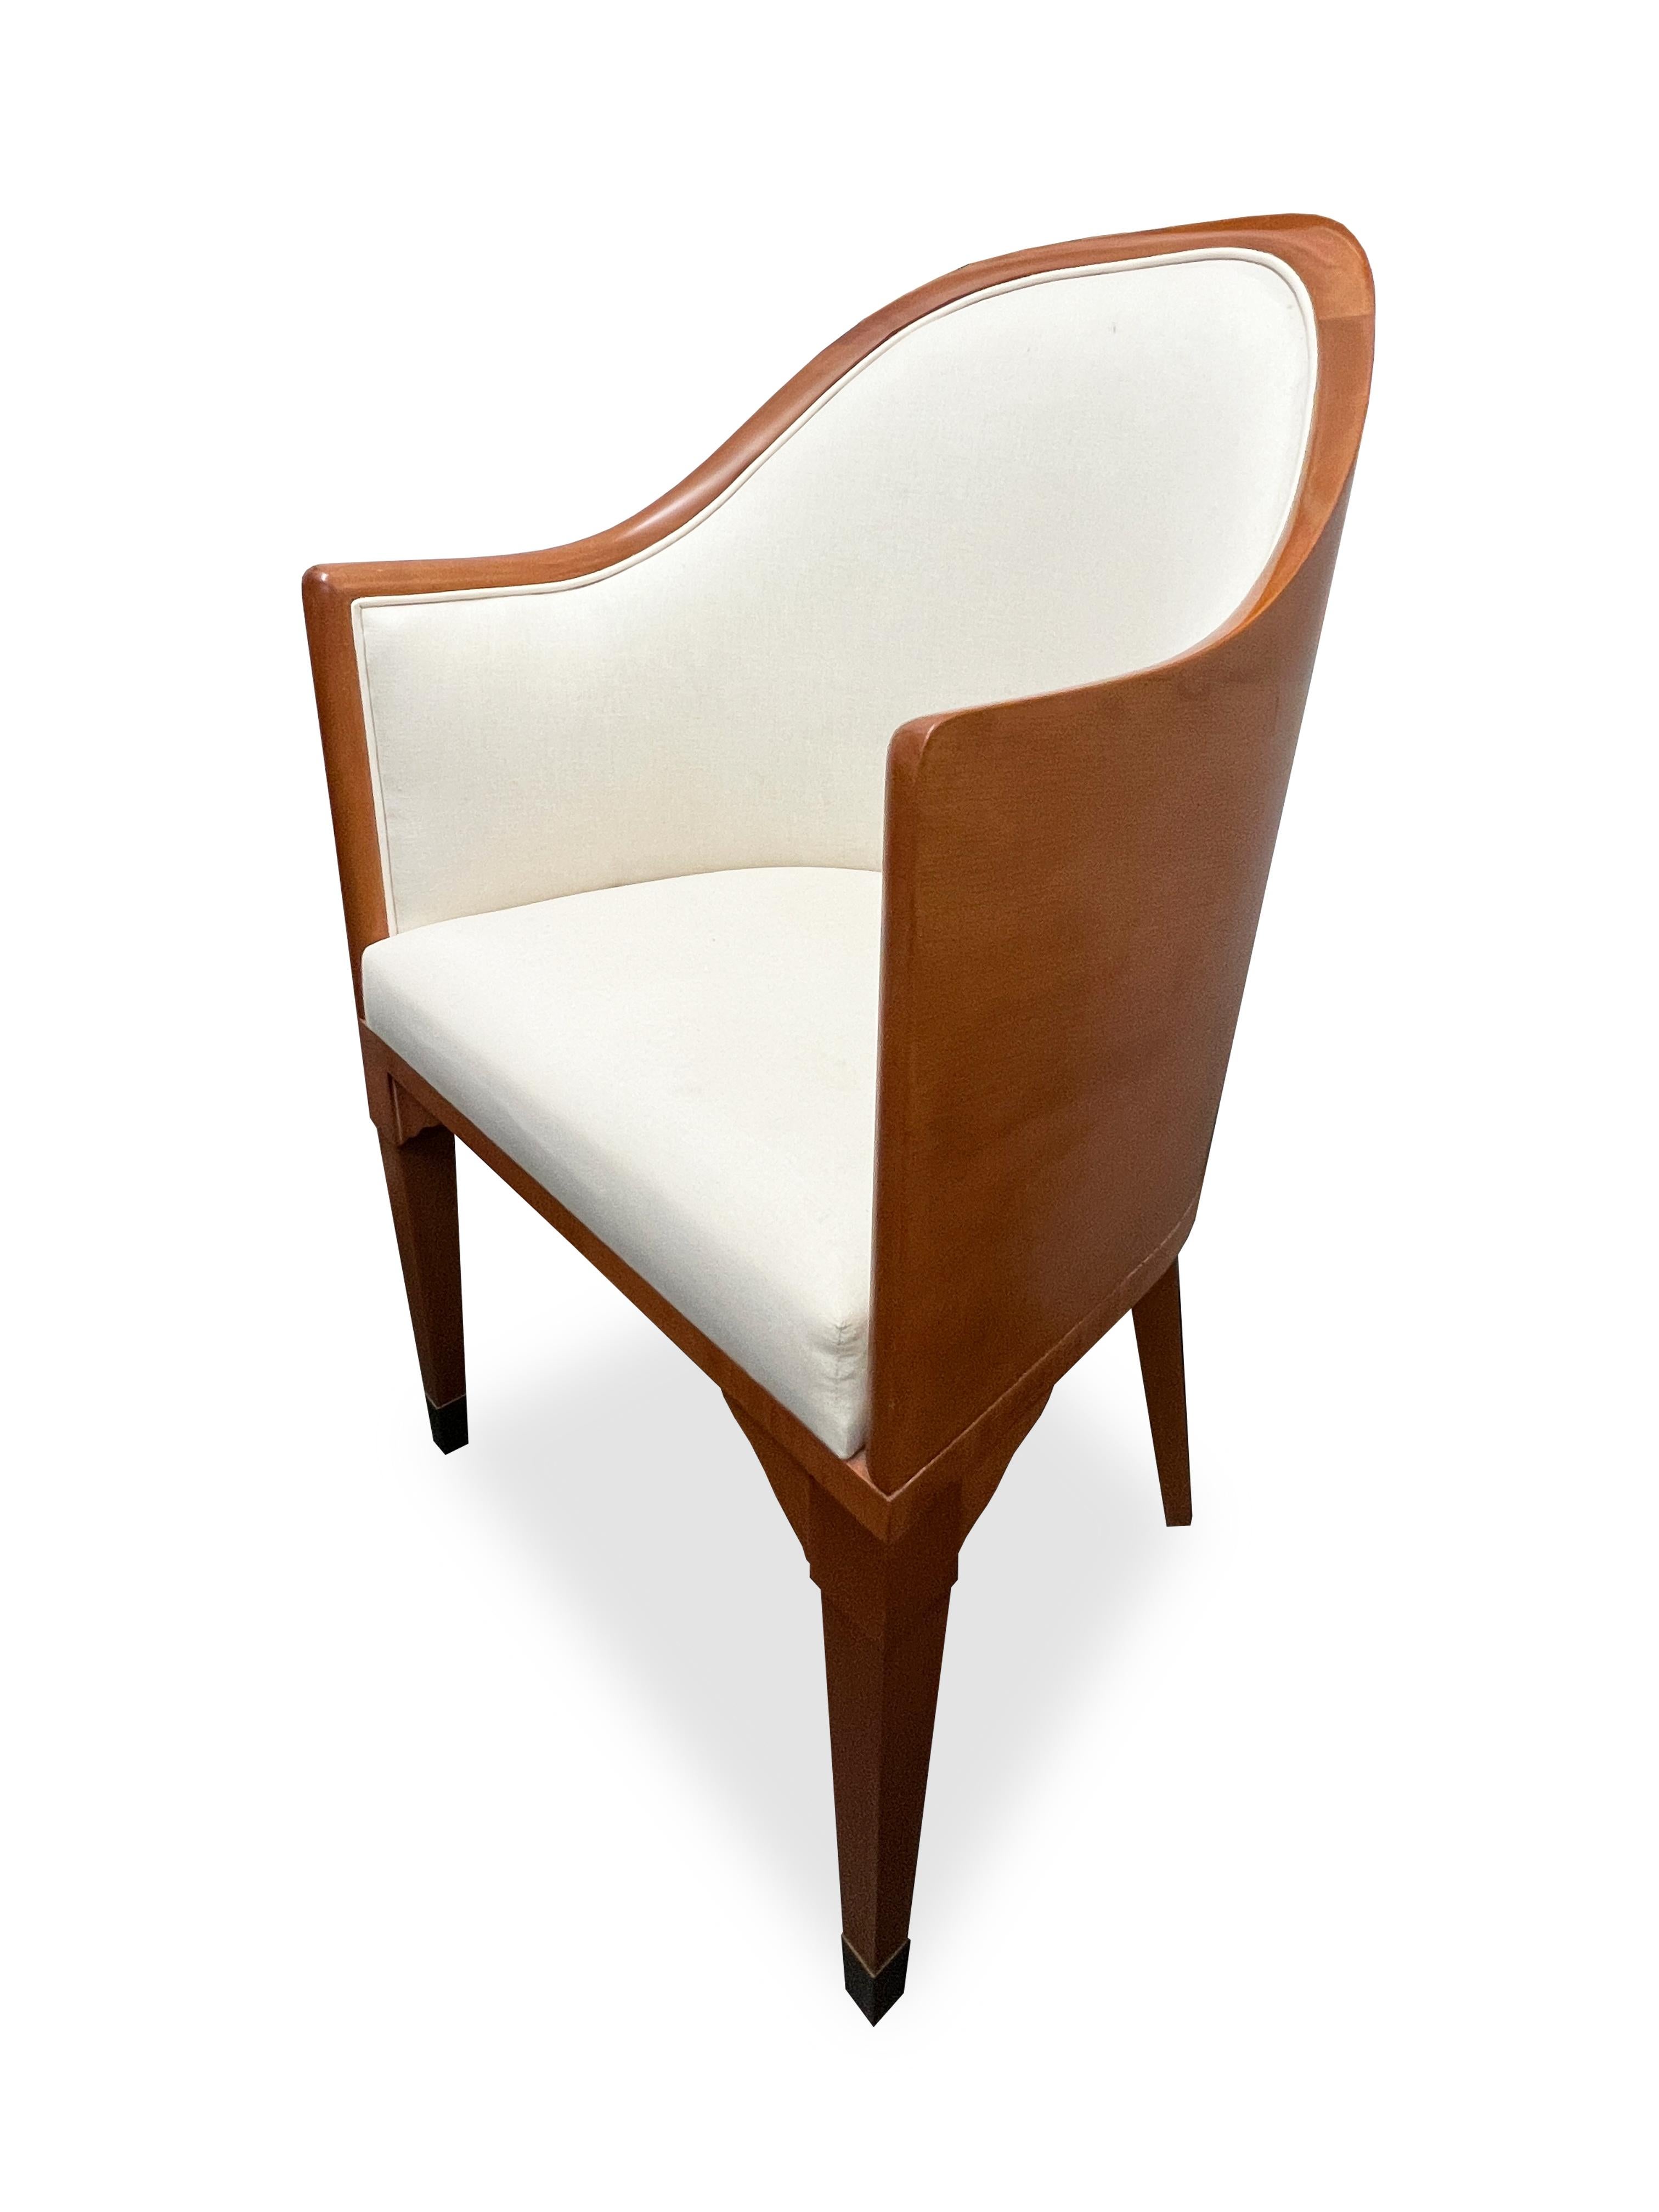 Wooden armchair design by Juan Montoya design. Sleek and comfortable chair with brass details on the legs. 

Property from esteemed interior designer Juan Montoya. Juan Montoya is one of the most acclaimed and prolific interior designers in the